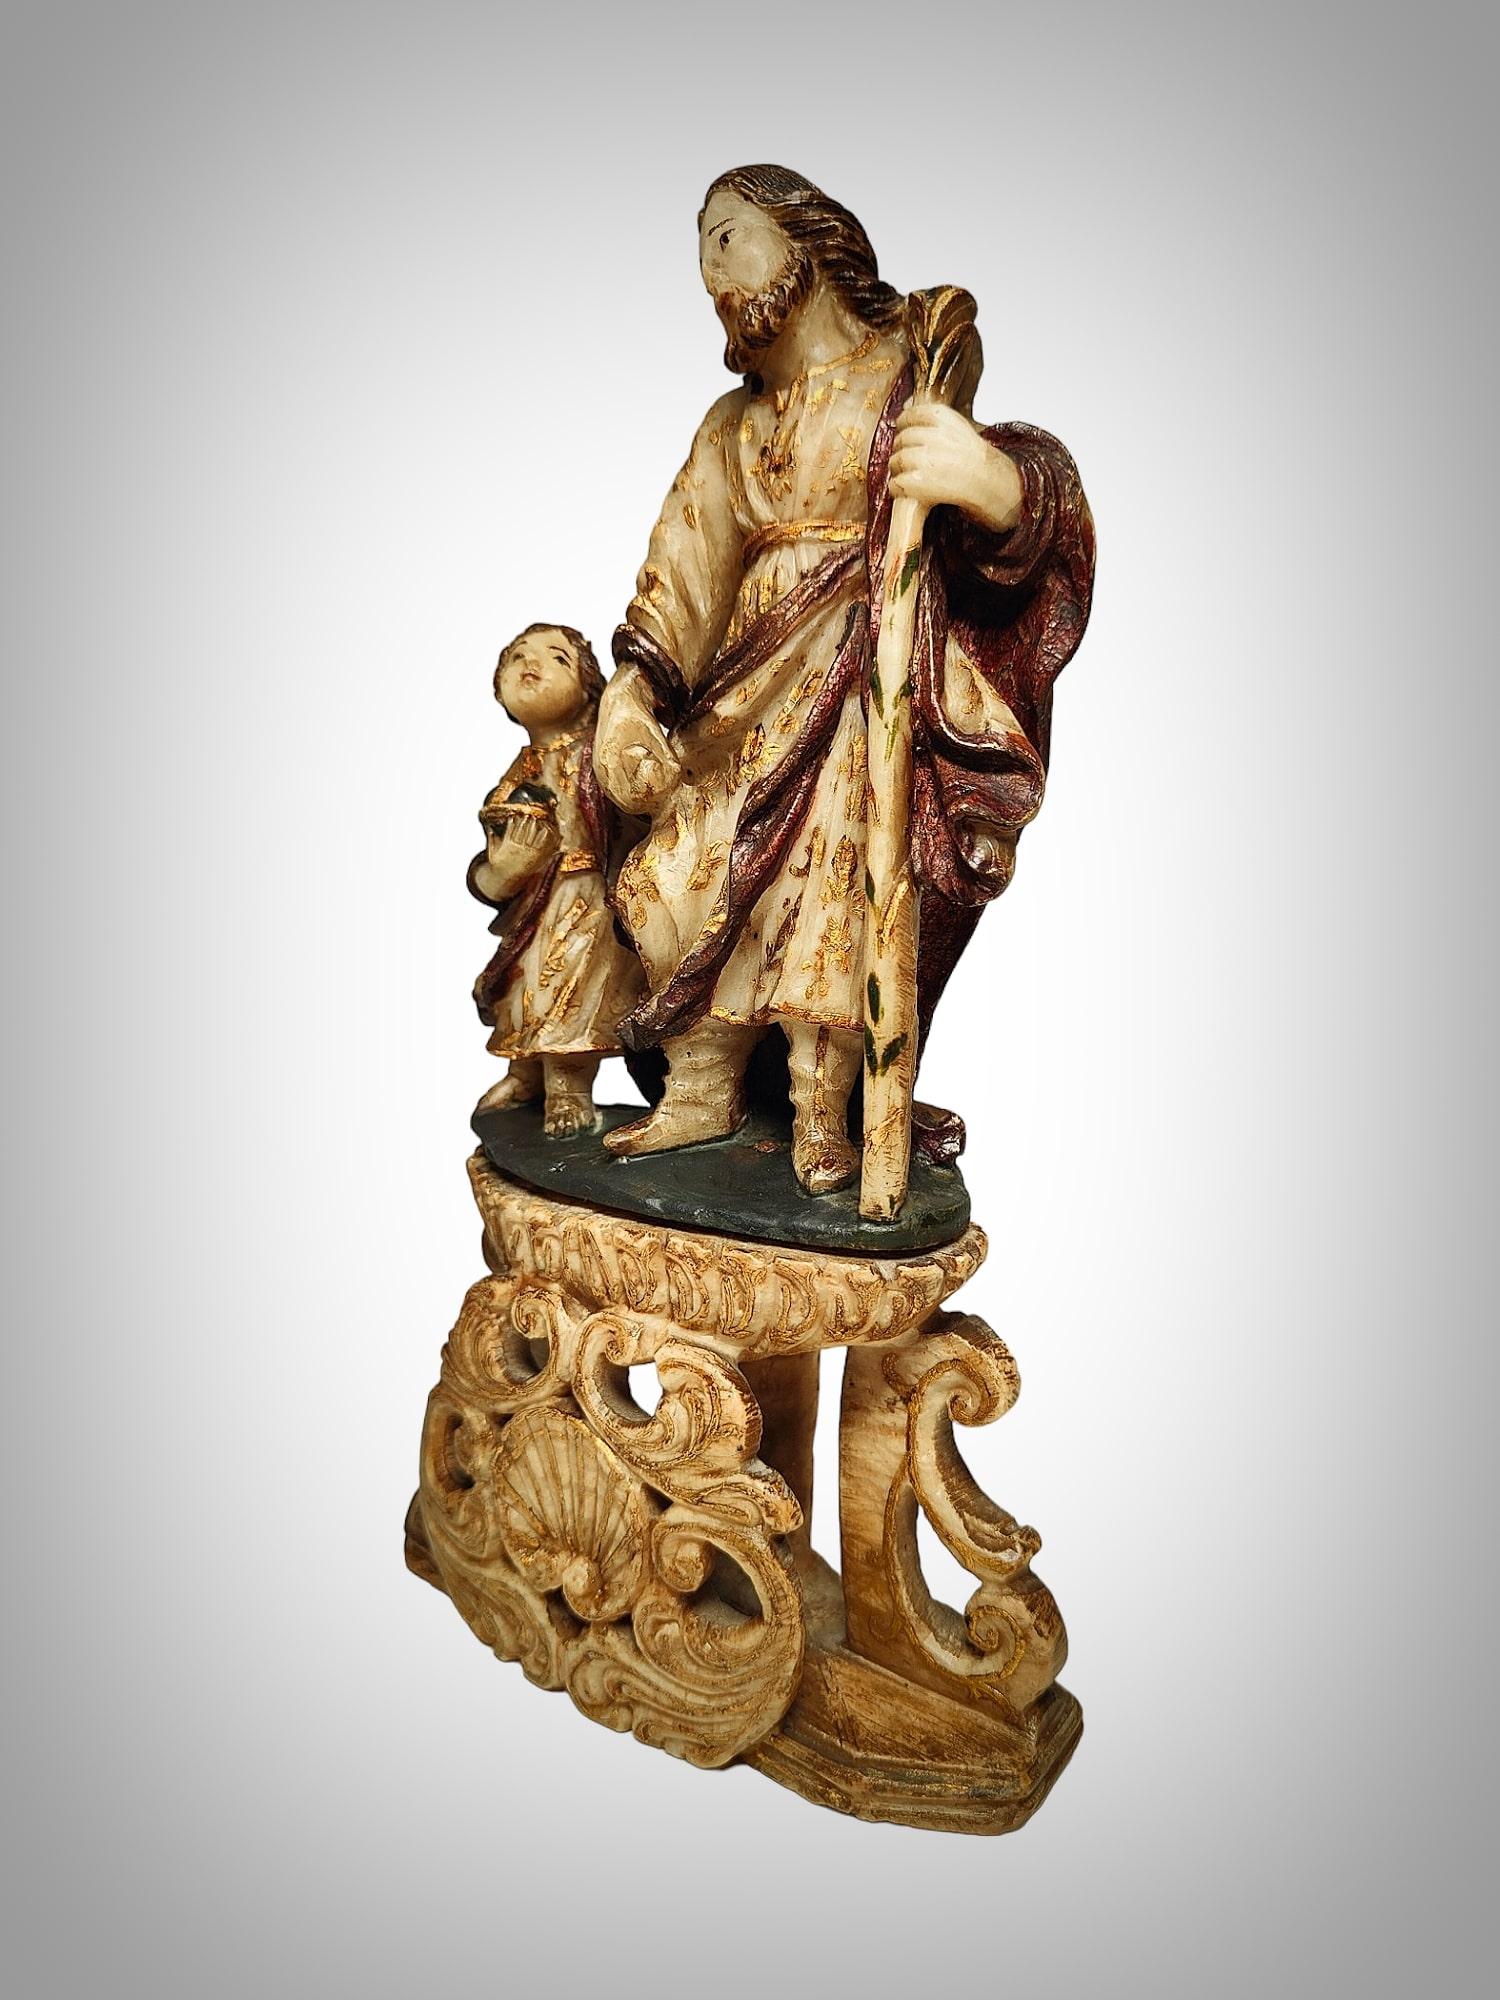 Product Description:

Material: Alabaster
Subject: Saint Joseph with the Child
Origin: Trapani, Italy
Era: 17th Century
Technique: Finely carved and polychromed
Condition: Excellent, fully original, very well-preserved
Dimensions: 25 x 15 x 5 cm